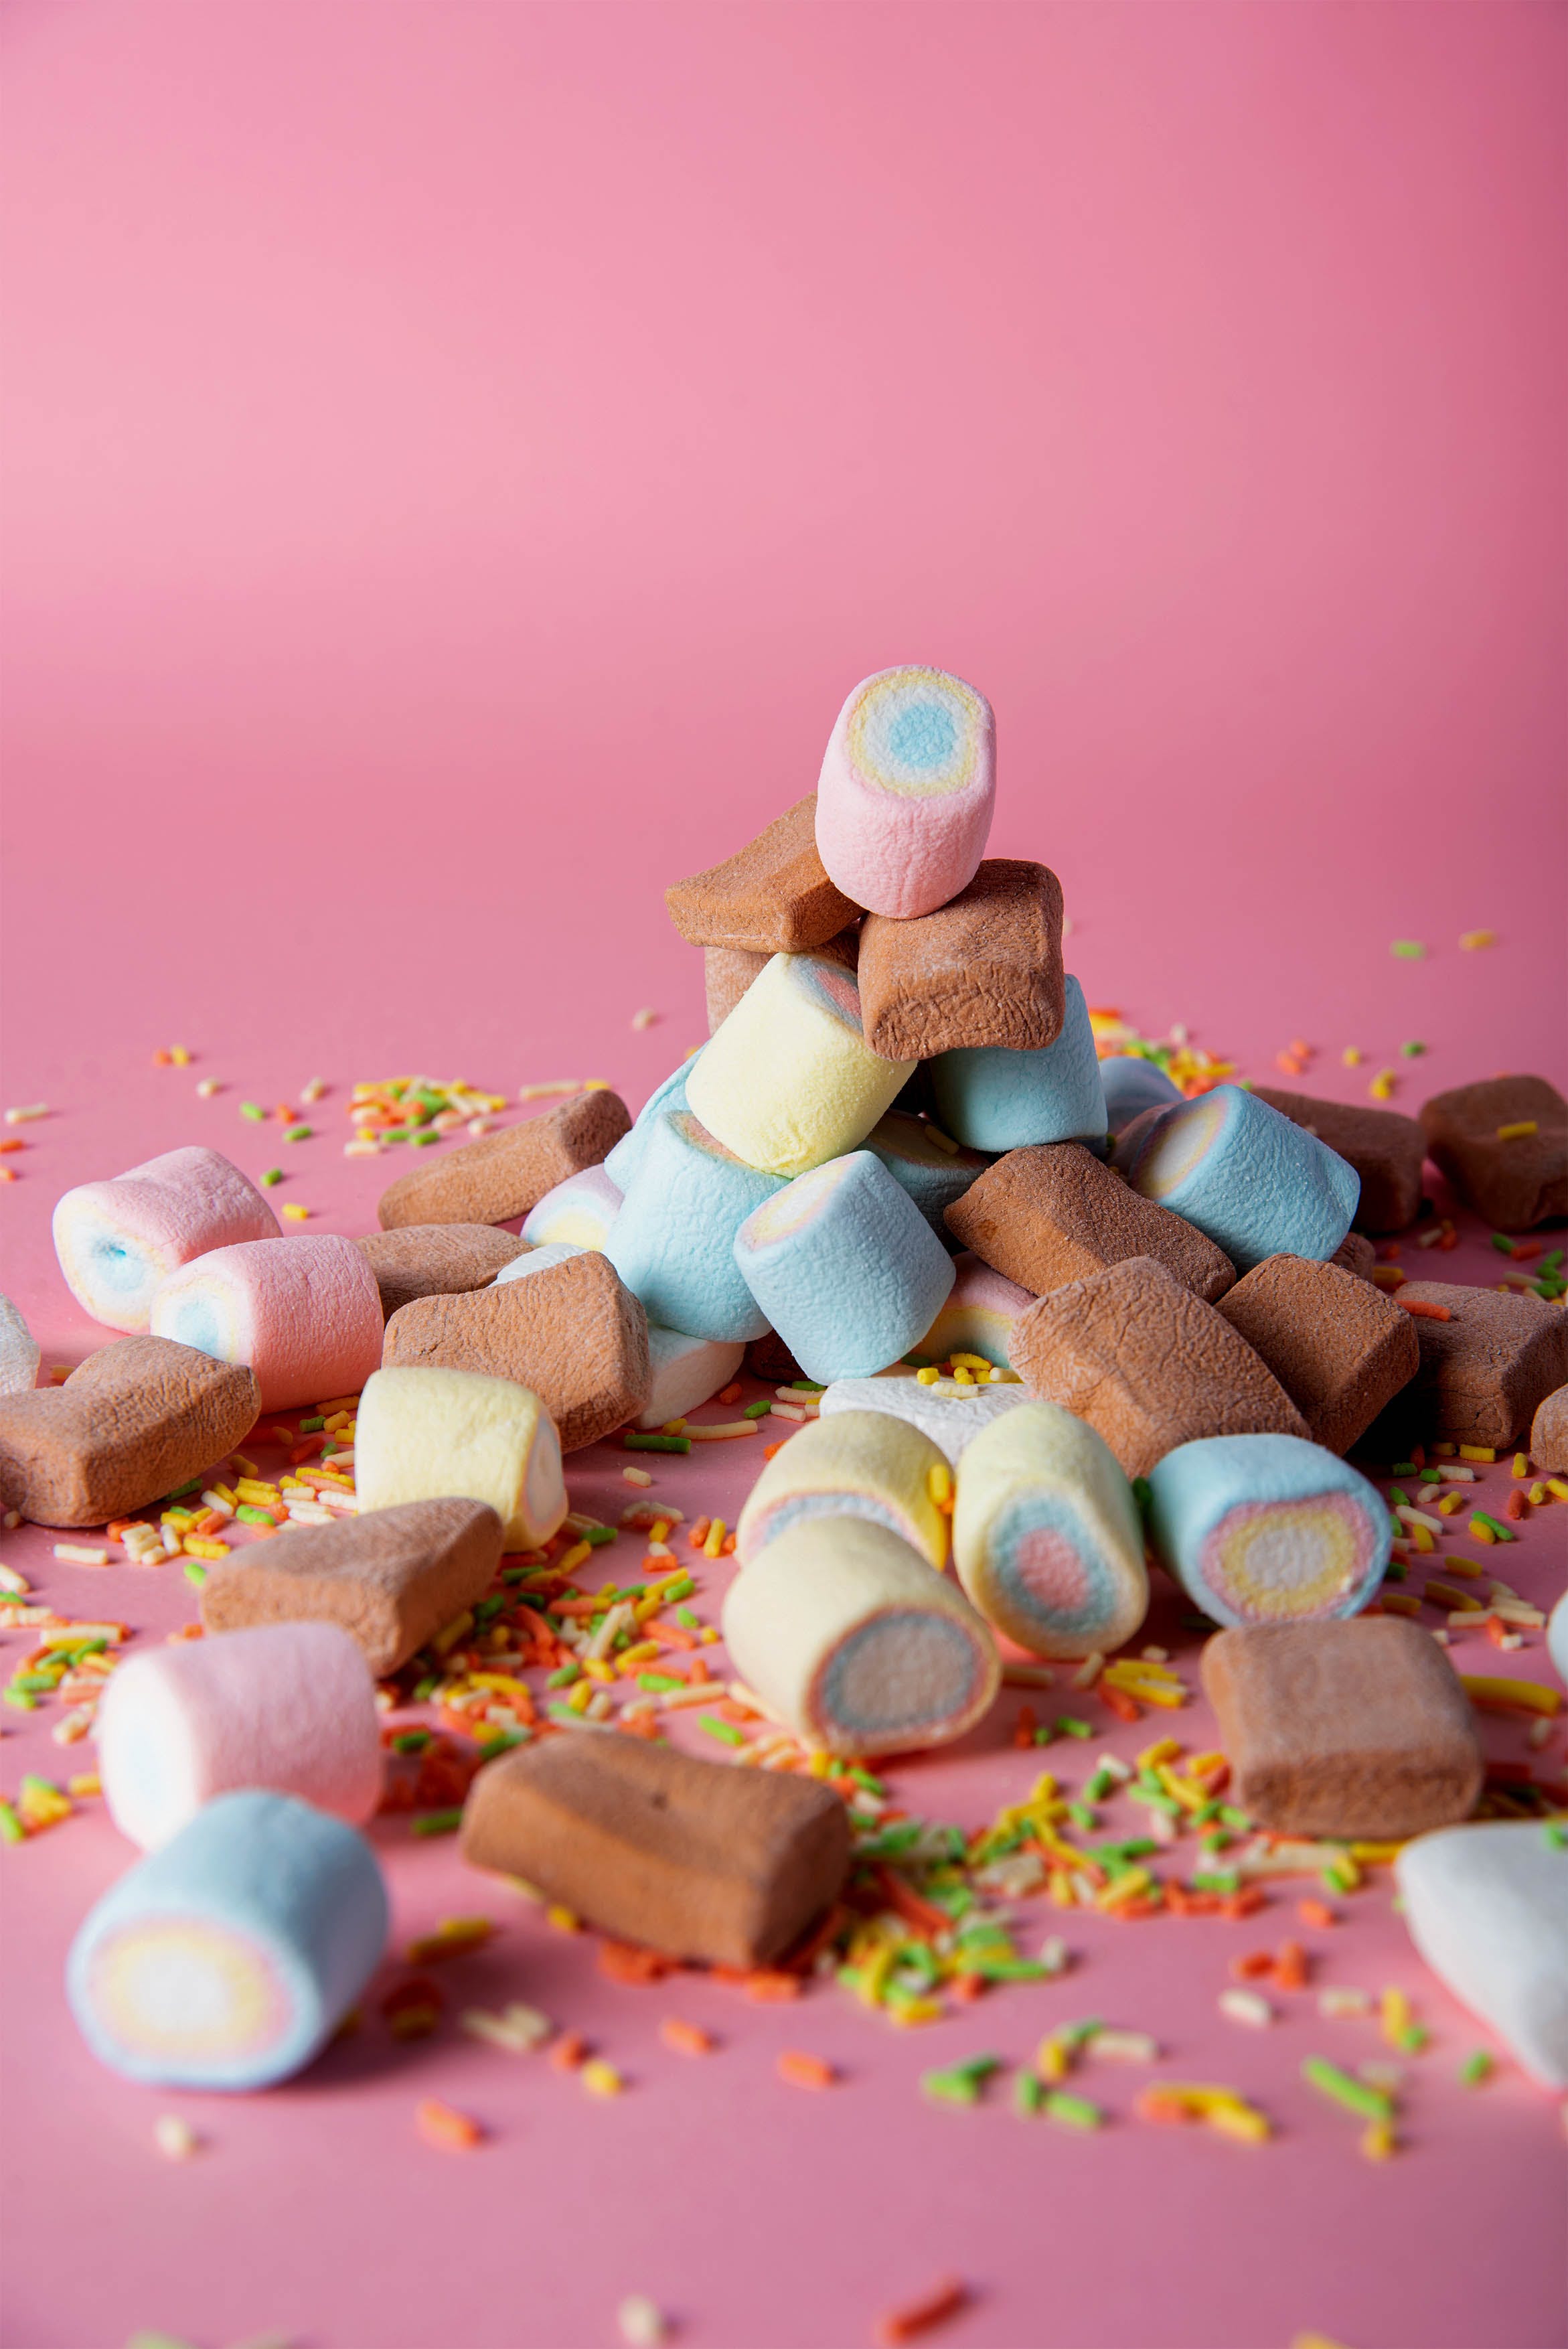 A pile of different colored marshmallows with sprinkles on a pink background - Marshmallows